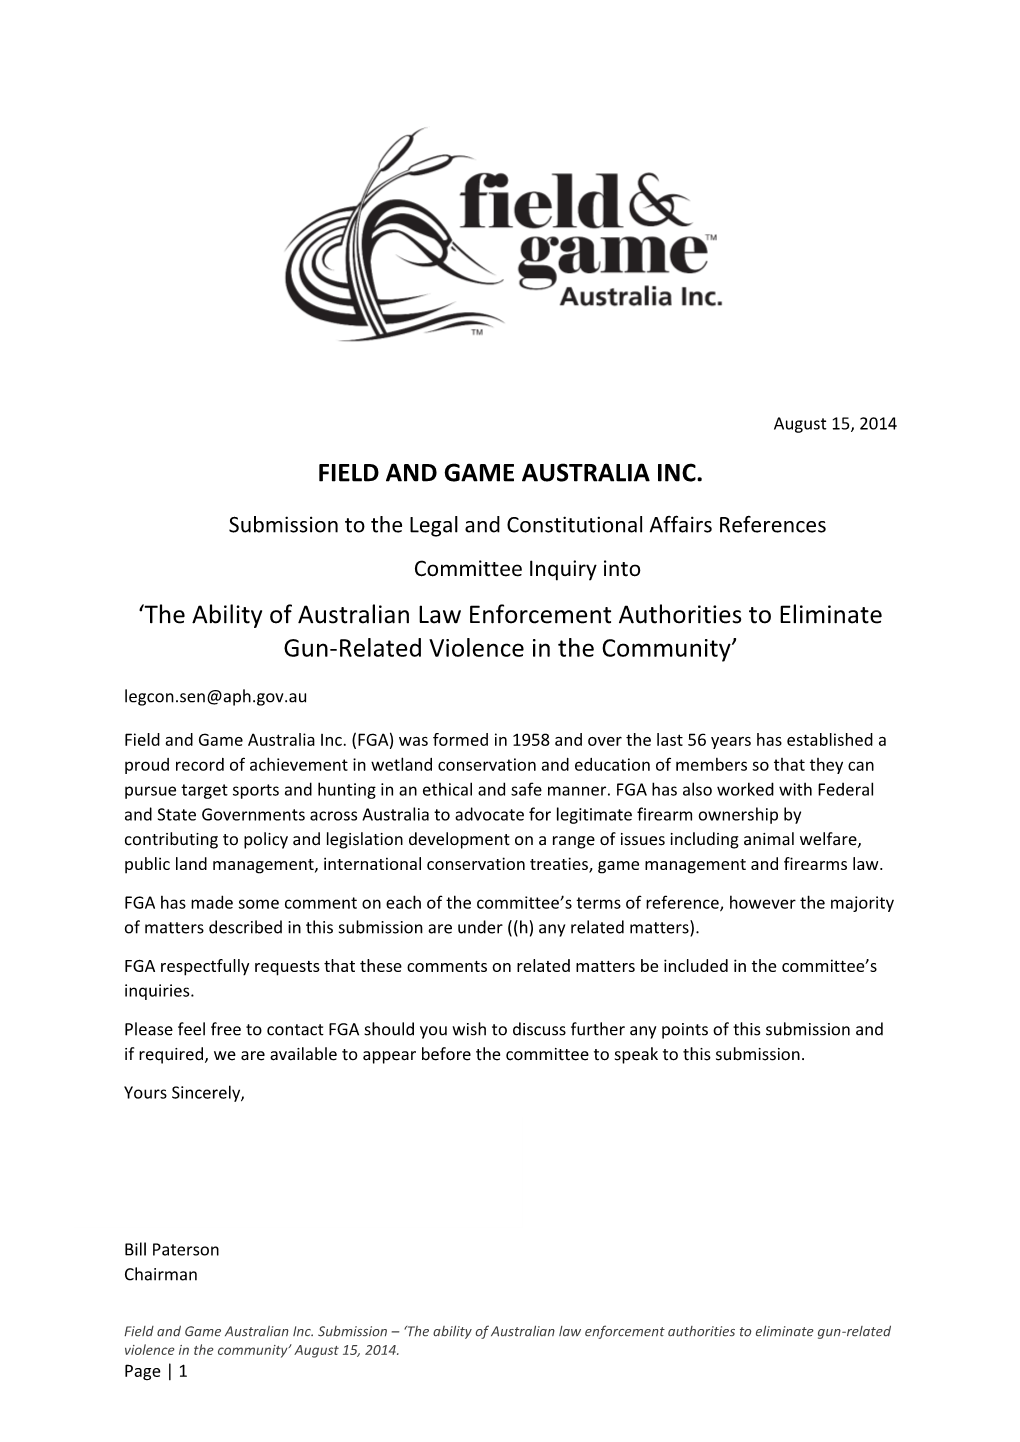 FIELD and GAME AUSTRALIA INC. 'The Ability of Australian Law